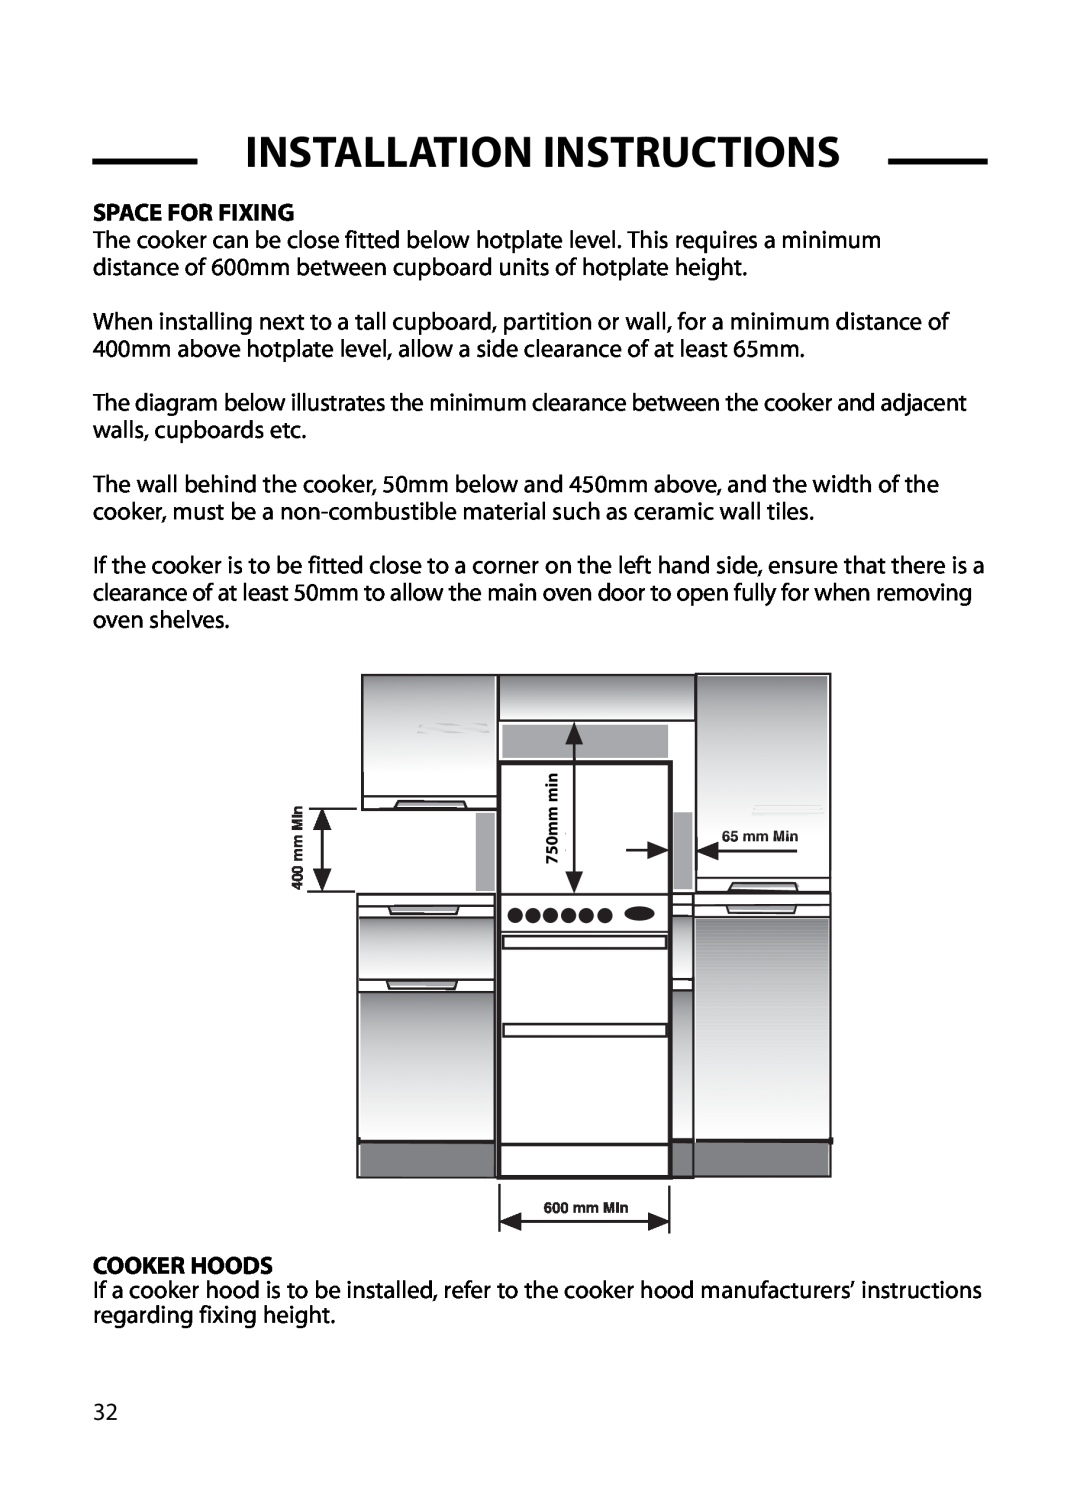 Hotpoint GW66, GW54, GW62, 6 DOG manual Space For Fixing, Cooker Hoods, Installation Instructions 